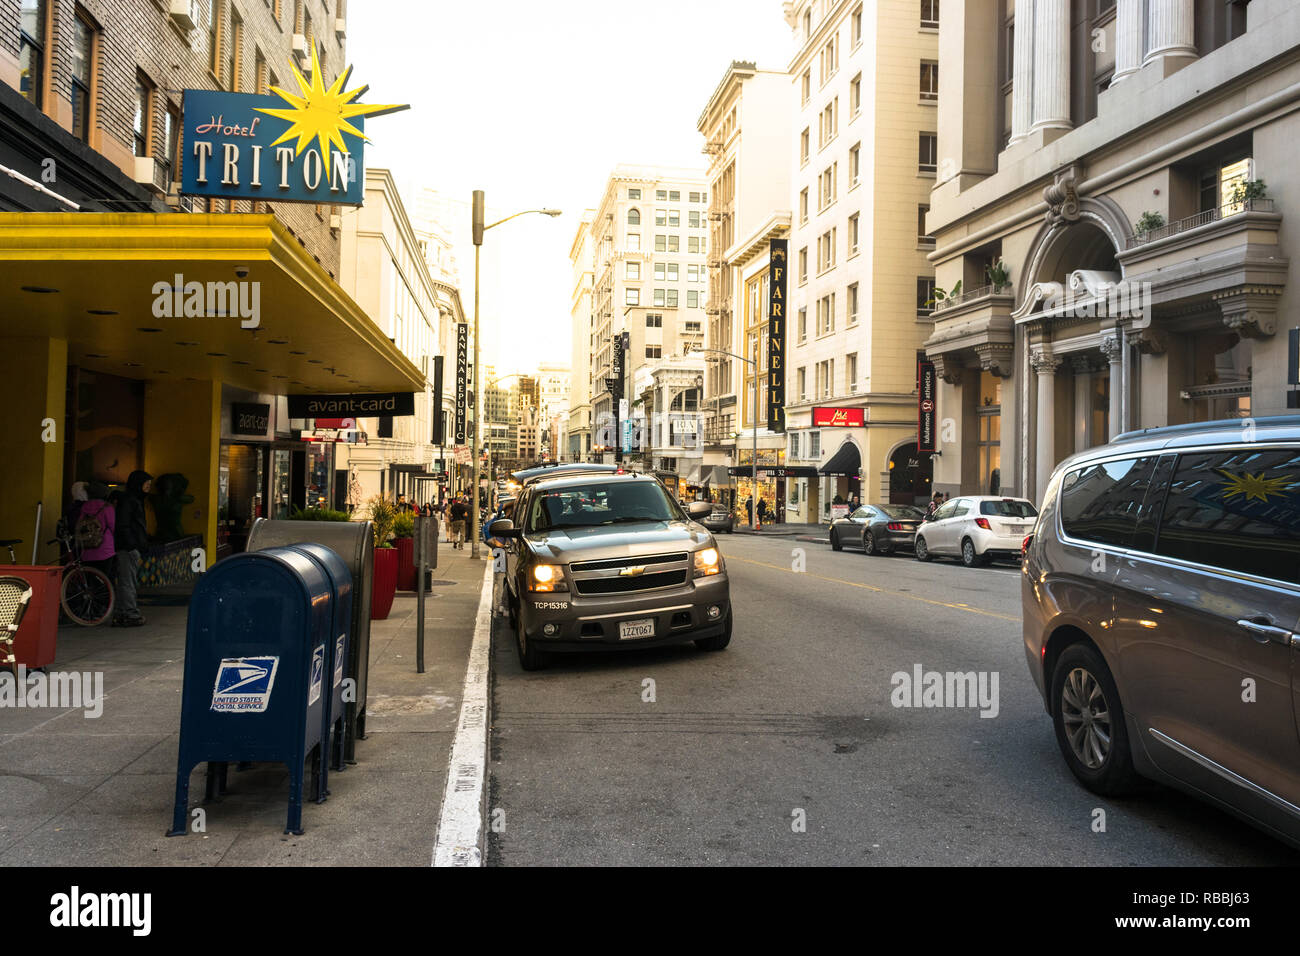 SAN FRANCISCO, USA - FEBRUARY 22, 2017: Hotel Triton in the great streets of San Francisco where some buildings are located. Stock Photo